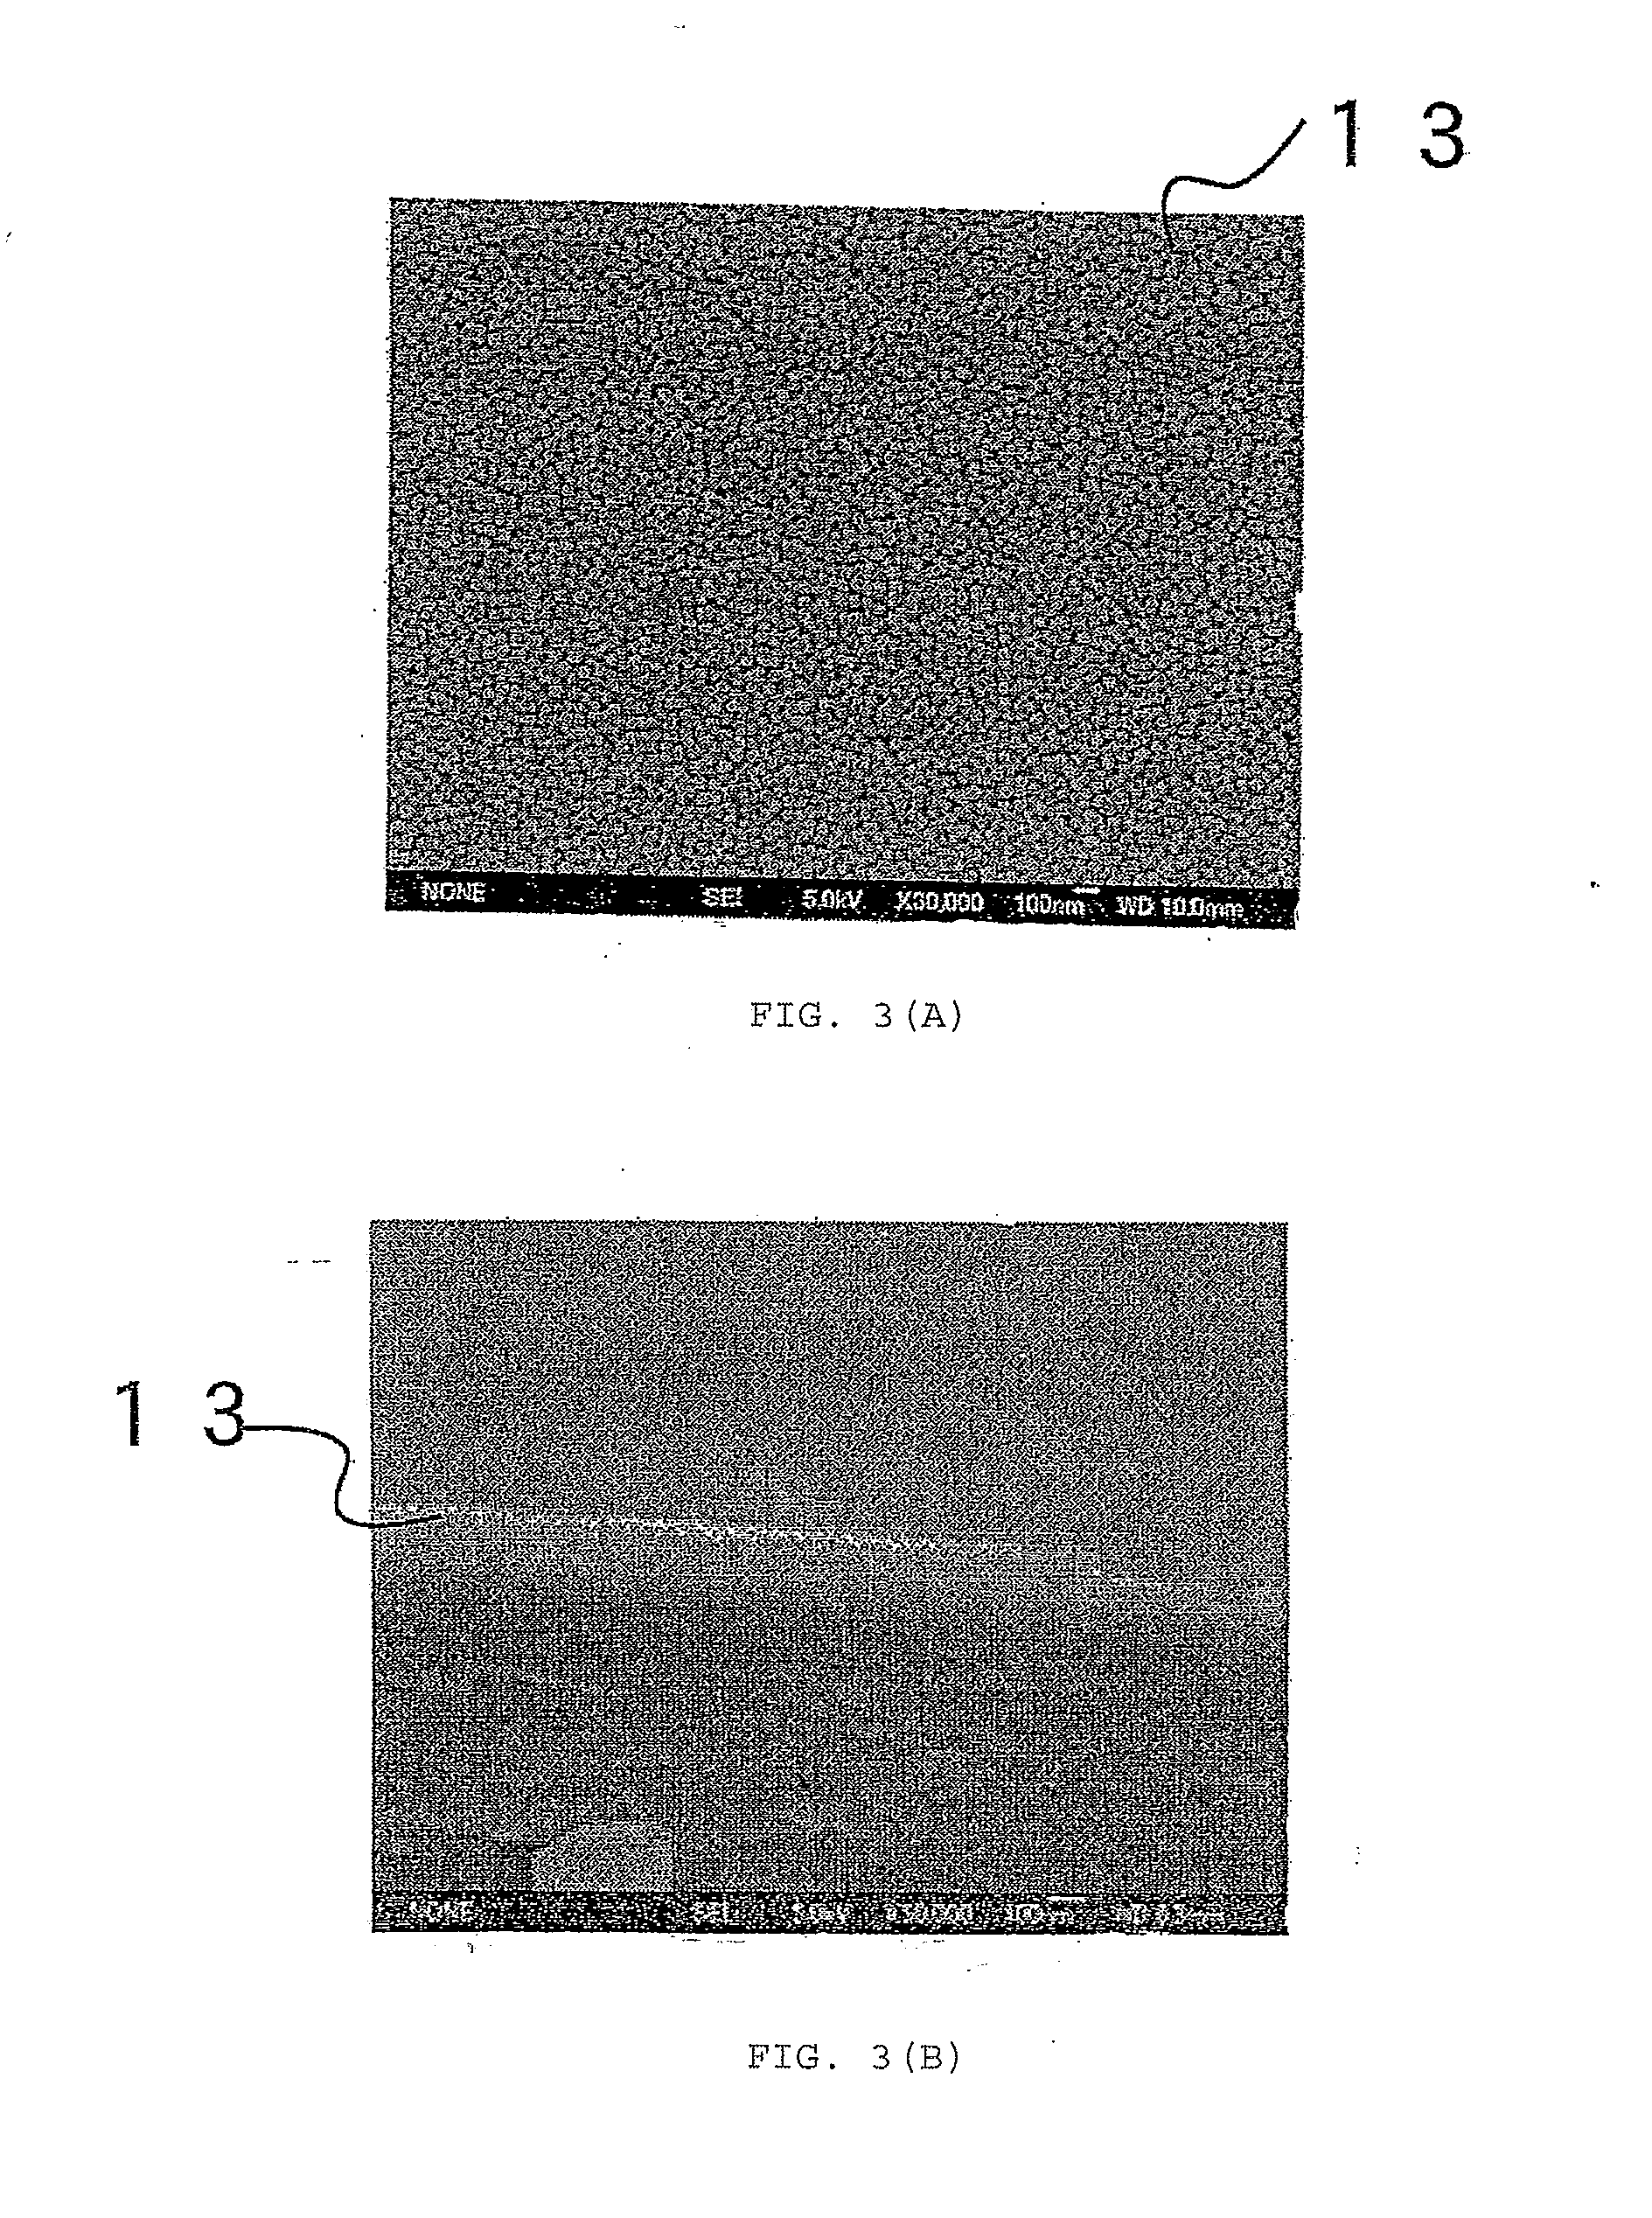 Antireflection Film and Optical Device